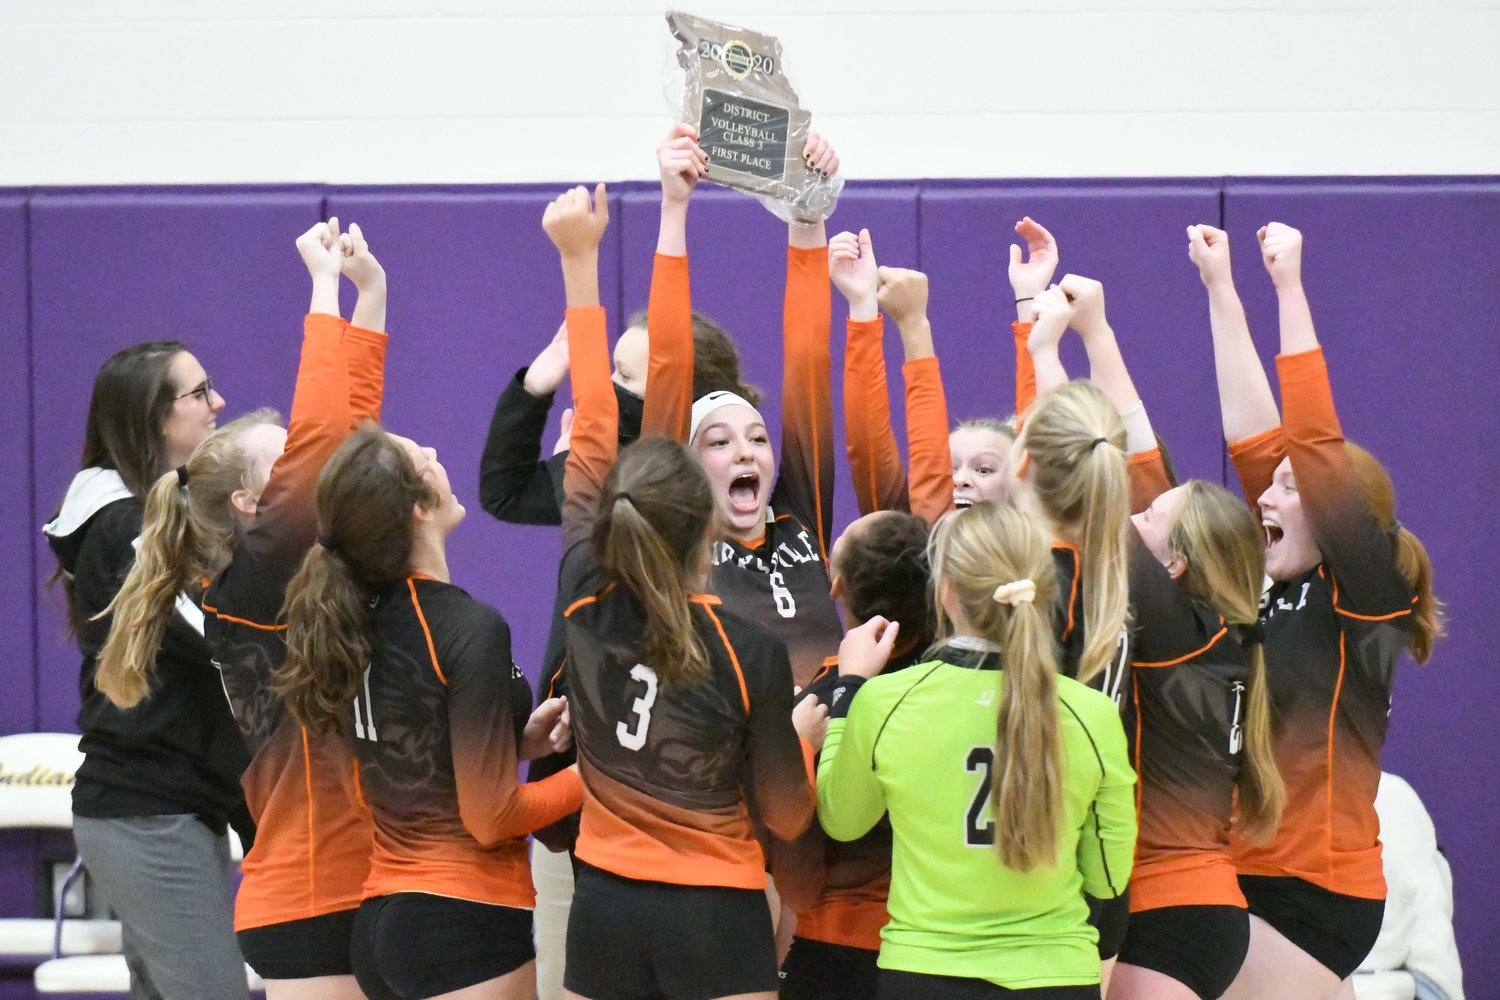 Kirksville senior middle hitter Emily Middleton hoists up the Class 3 District 7 trophy as her teammates cheer around her.